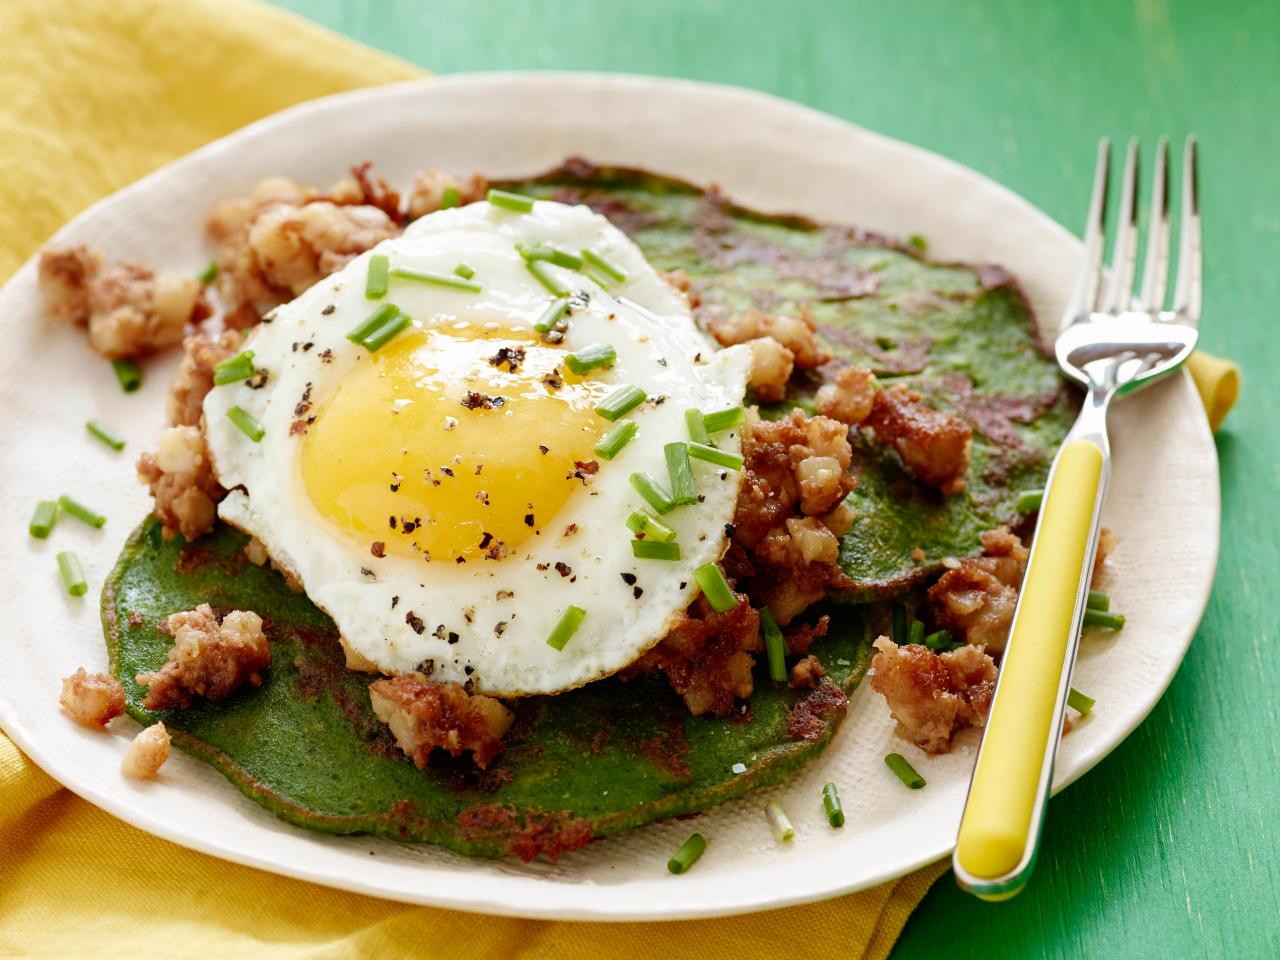 https://food.fnr.sndimg.com/content/dam/images/food/fullset/2014/1/29/1/FN_St-Patricks-Day-Spinach-Pancakes-and-Corned-Beef-Hash_s4x3.jpg.rend.hgtvcom.1280.960.suffix/1391199935940.jpeg